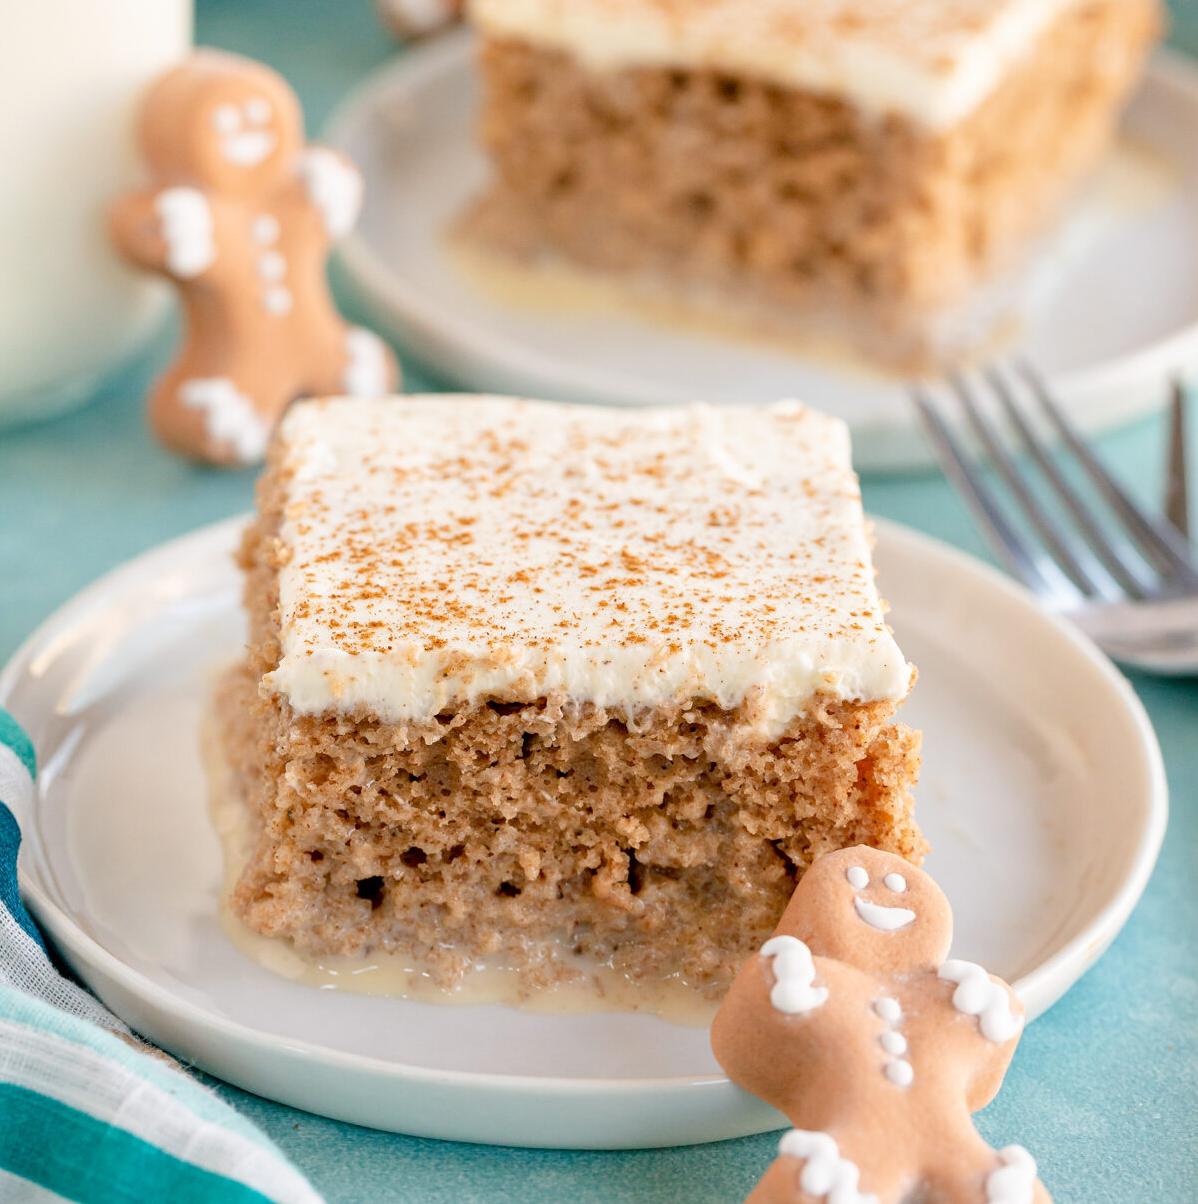  This cake is the perfect combination of spicy gingerbread and creamy tres leches